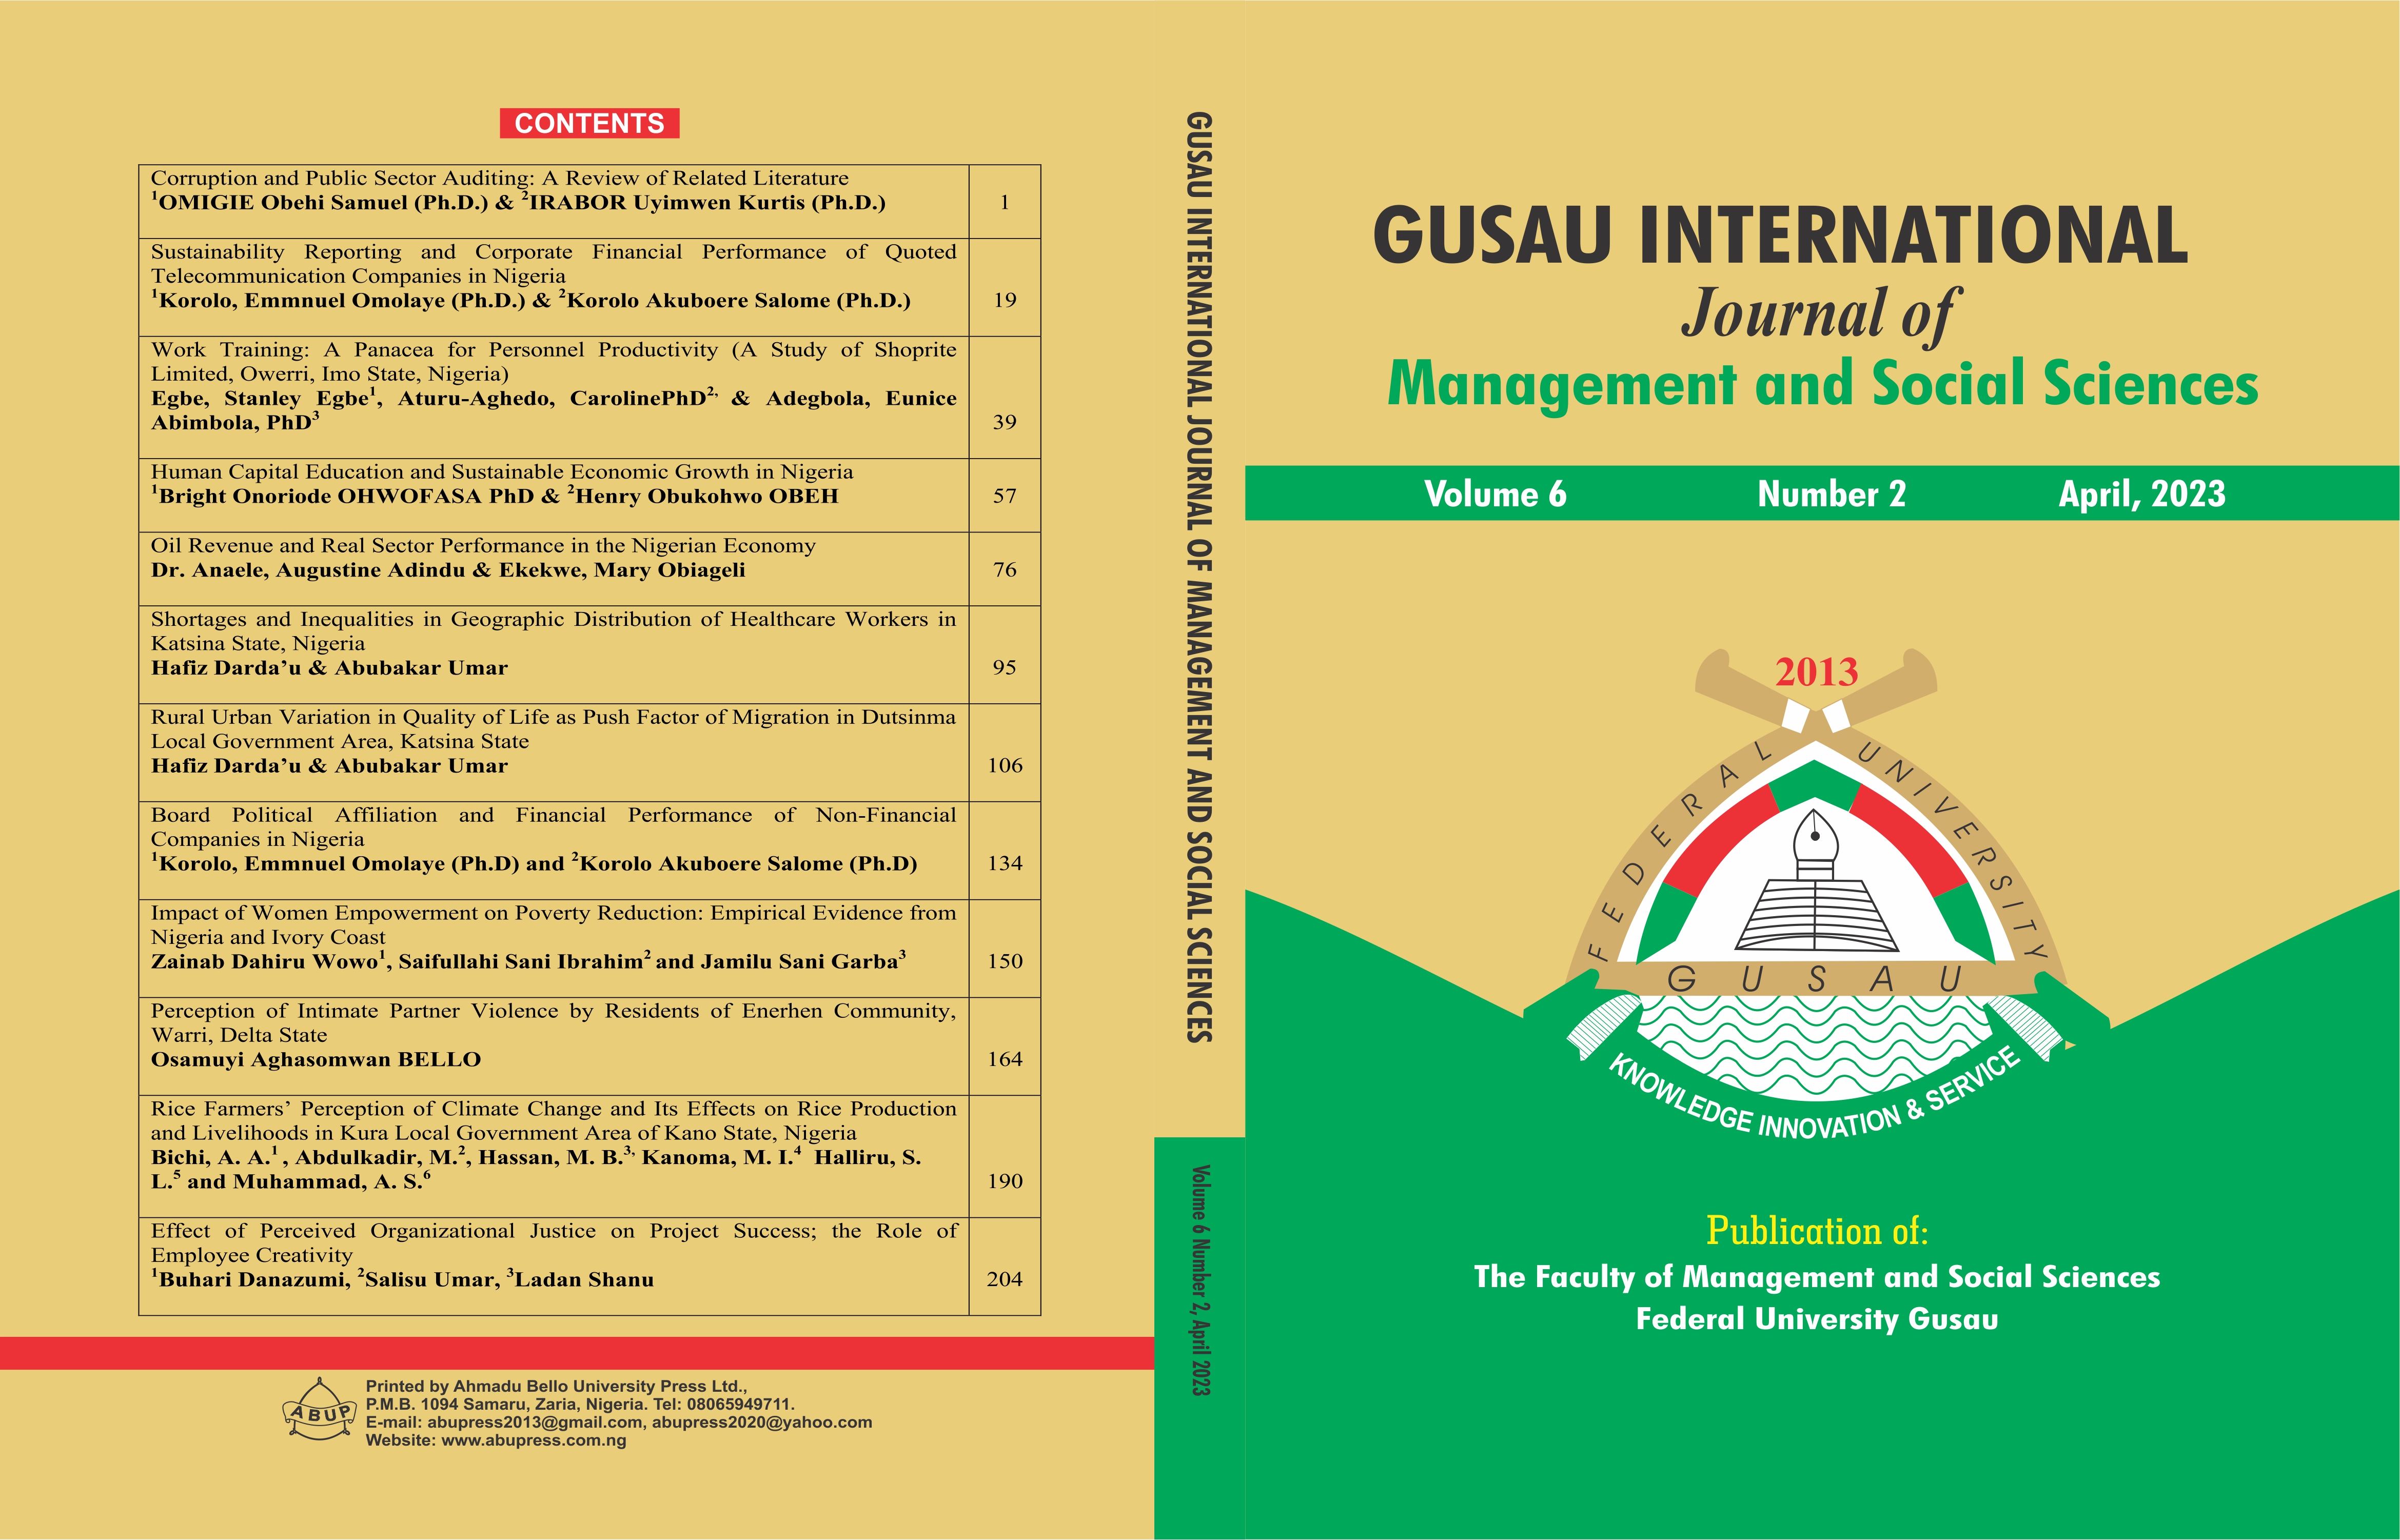 Gusau International Journal of Management and Social Sciences